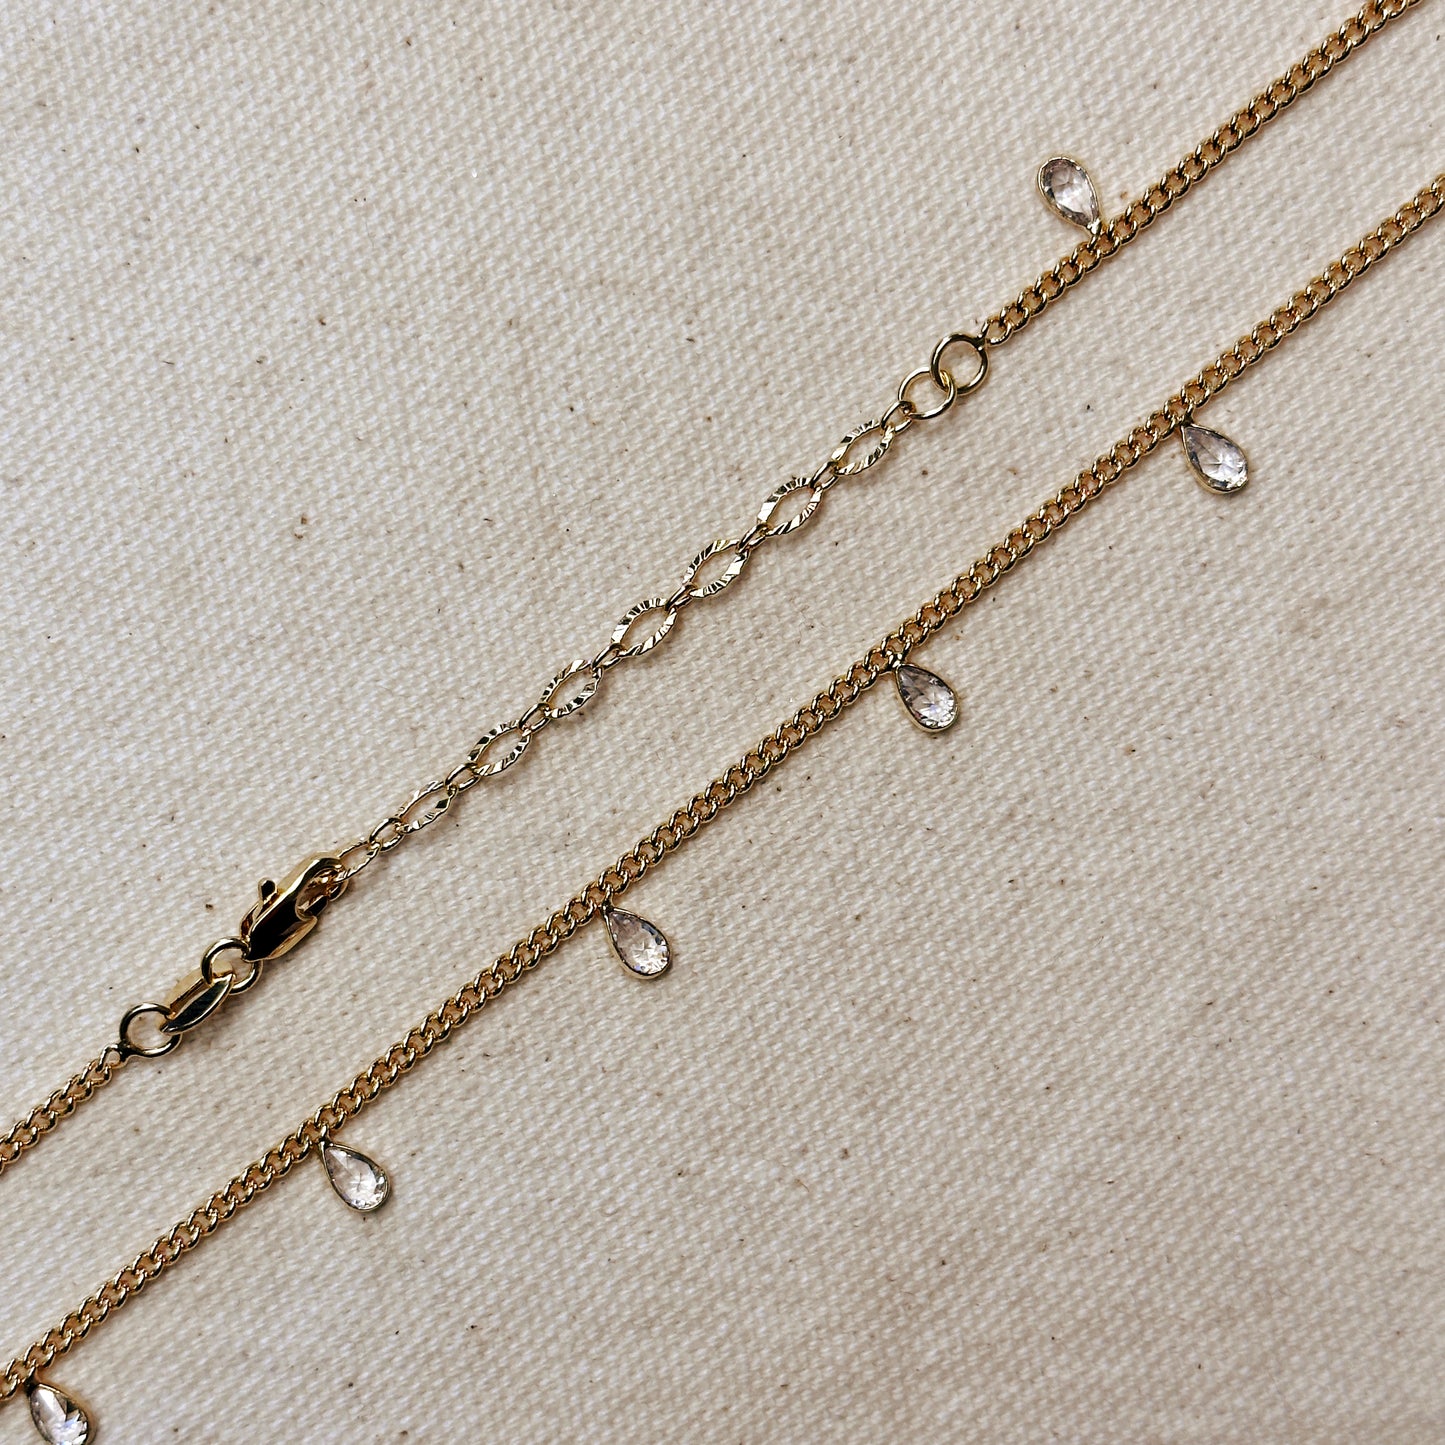 18k Gold Filled 2mm Curb Chain With Bezel CZ Drops Necklace